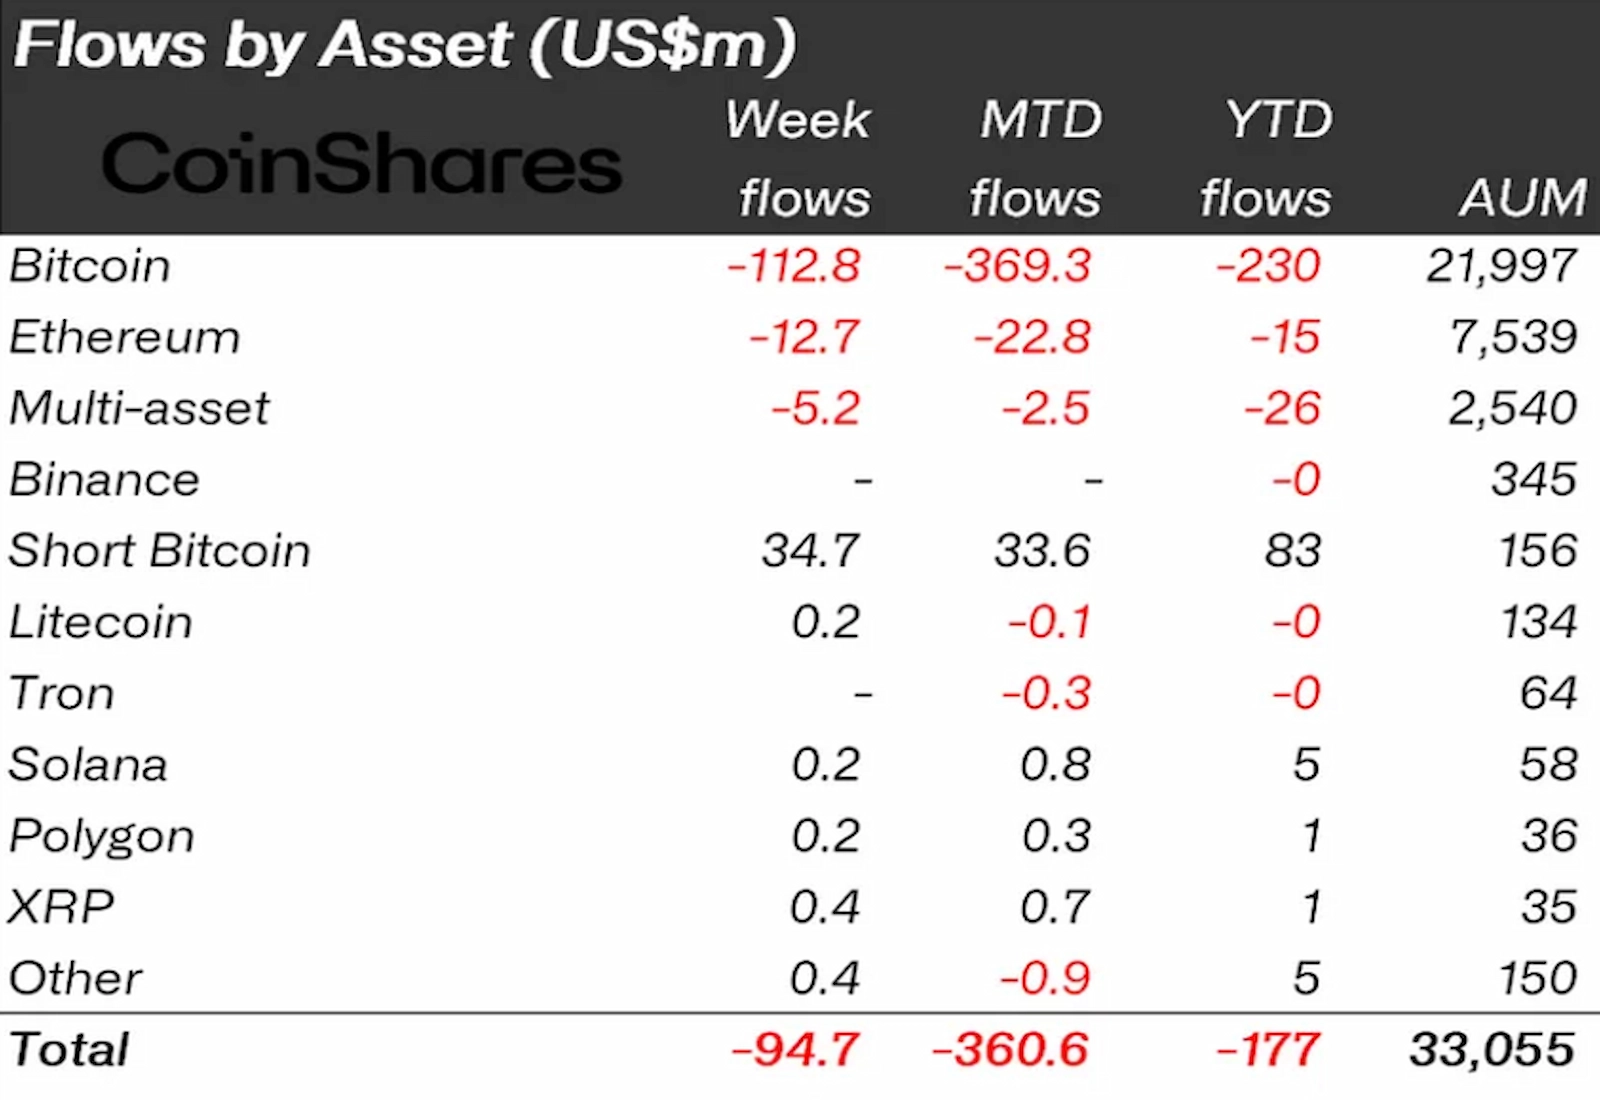 Weekly digital assets fund flow by an asset